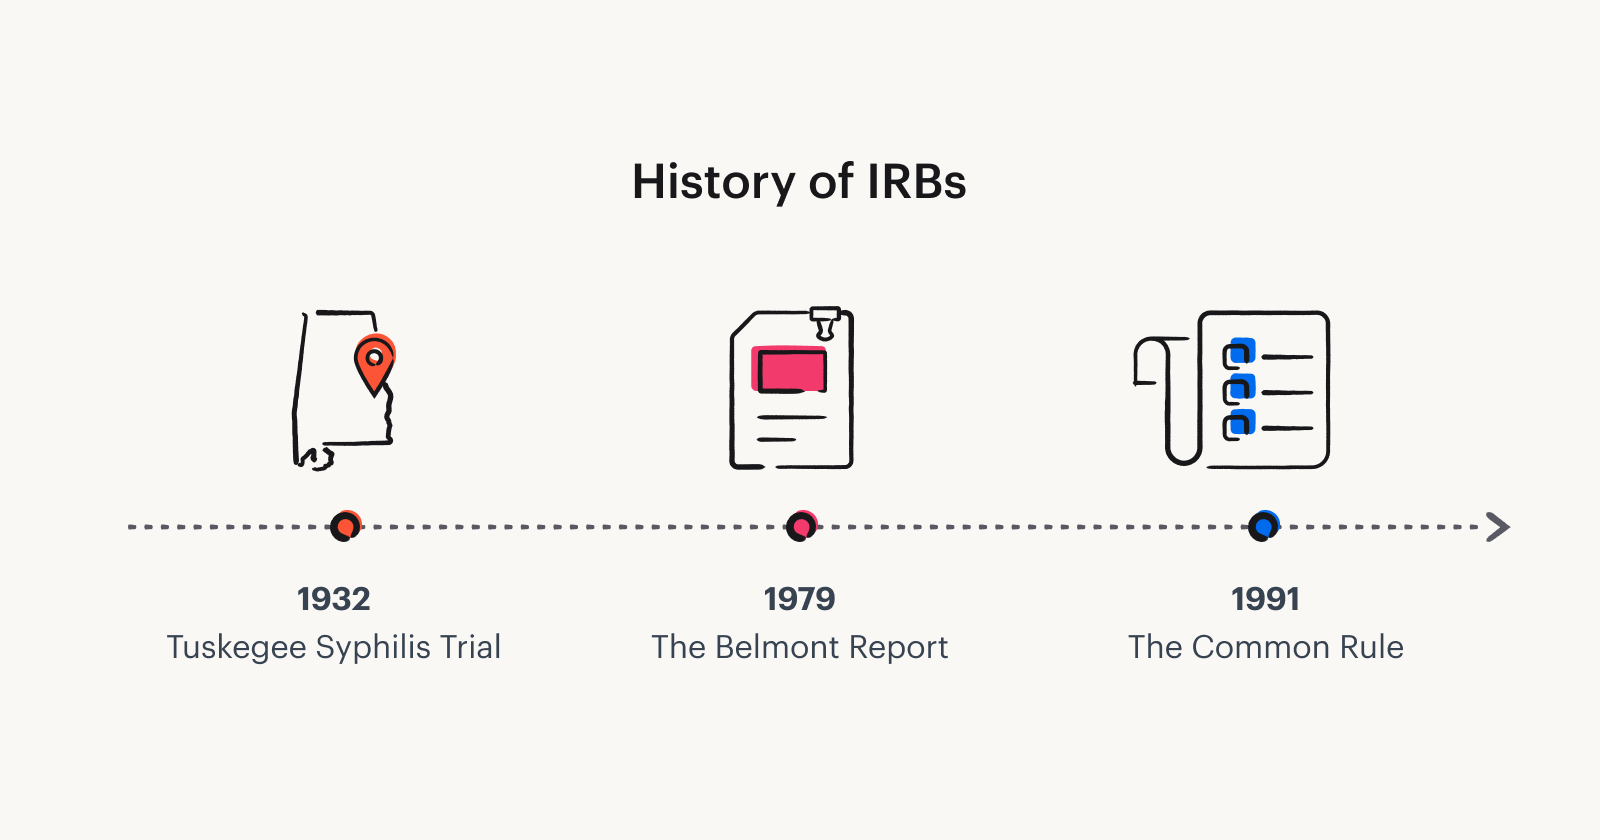 A timeline outlining the history of IRBs, from the Tuskegee Syphilis Trial, to the creation of the Belmont Report, to the launch of the Common Rule.